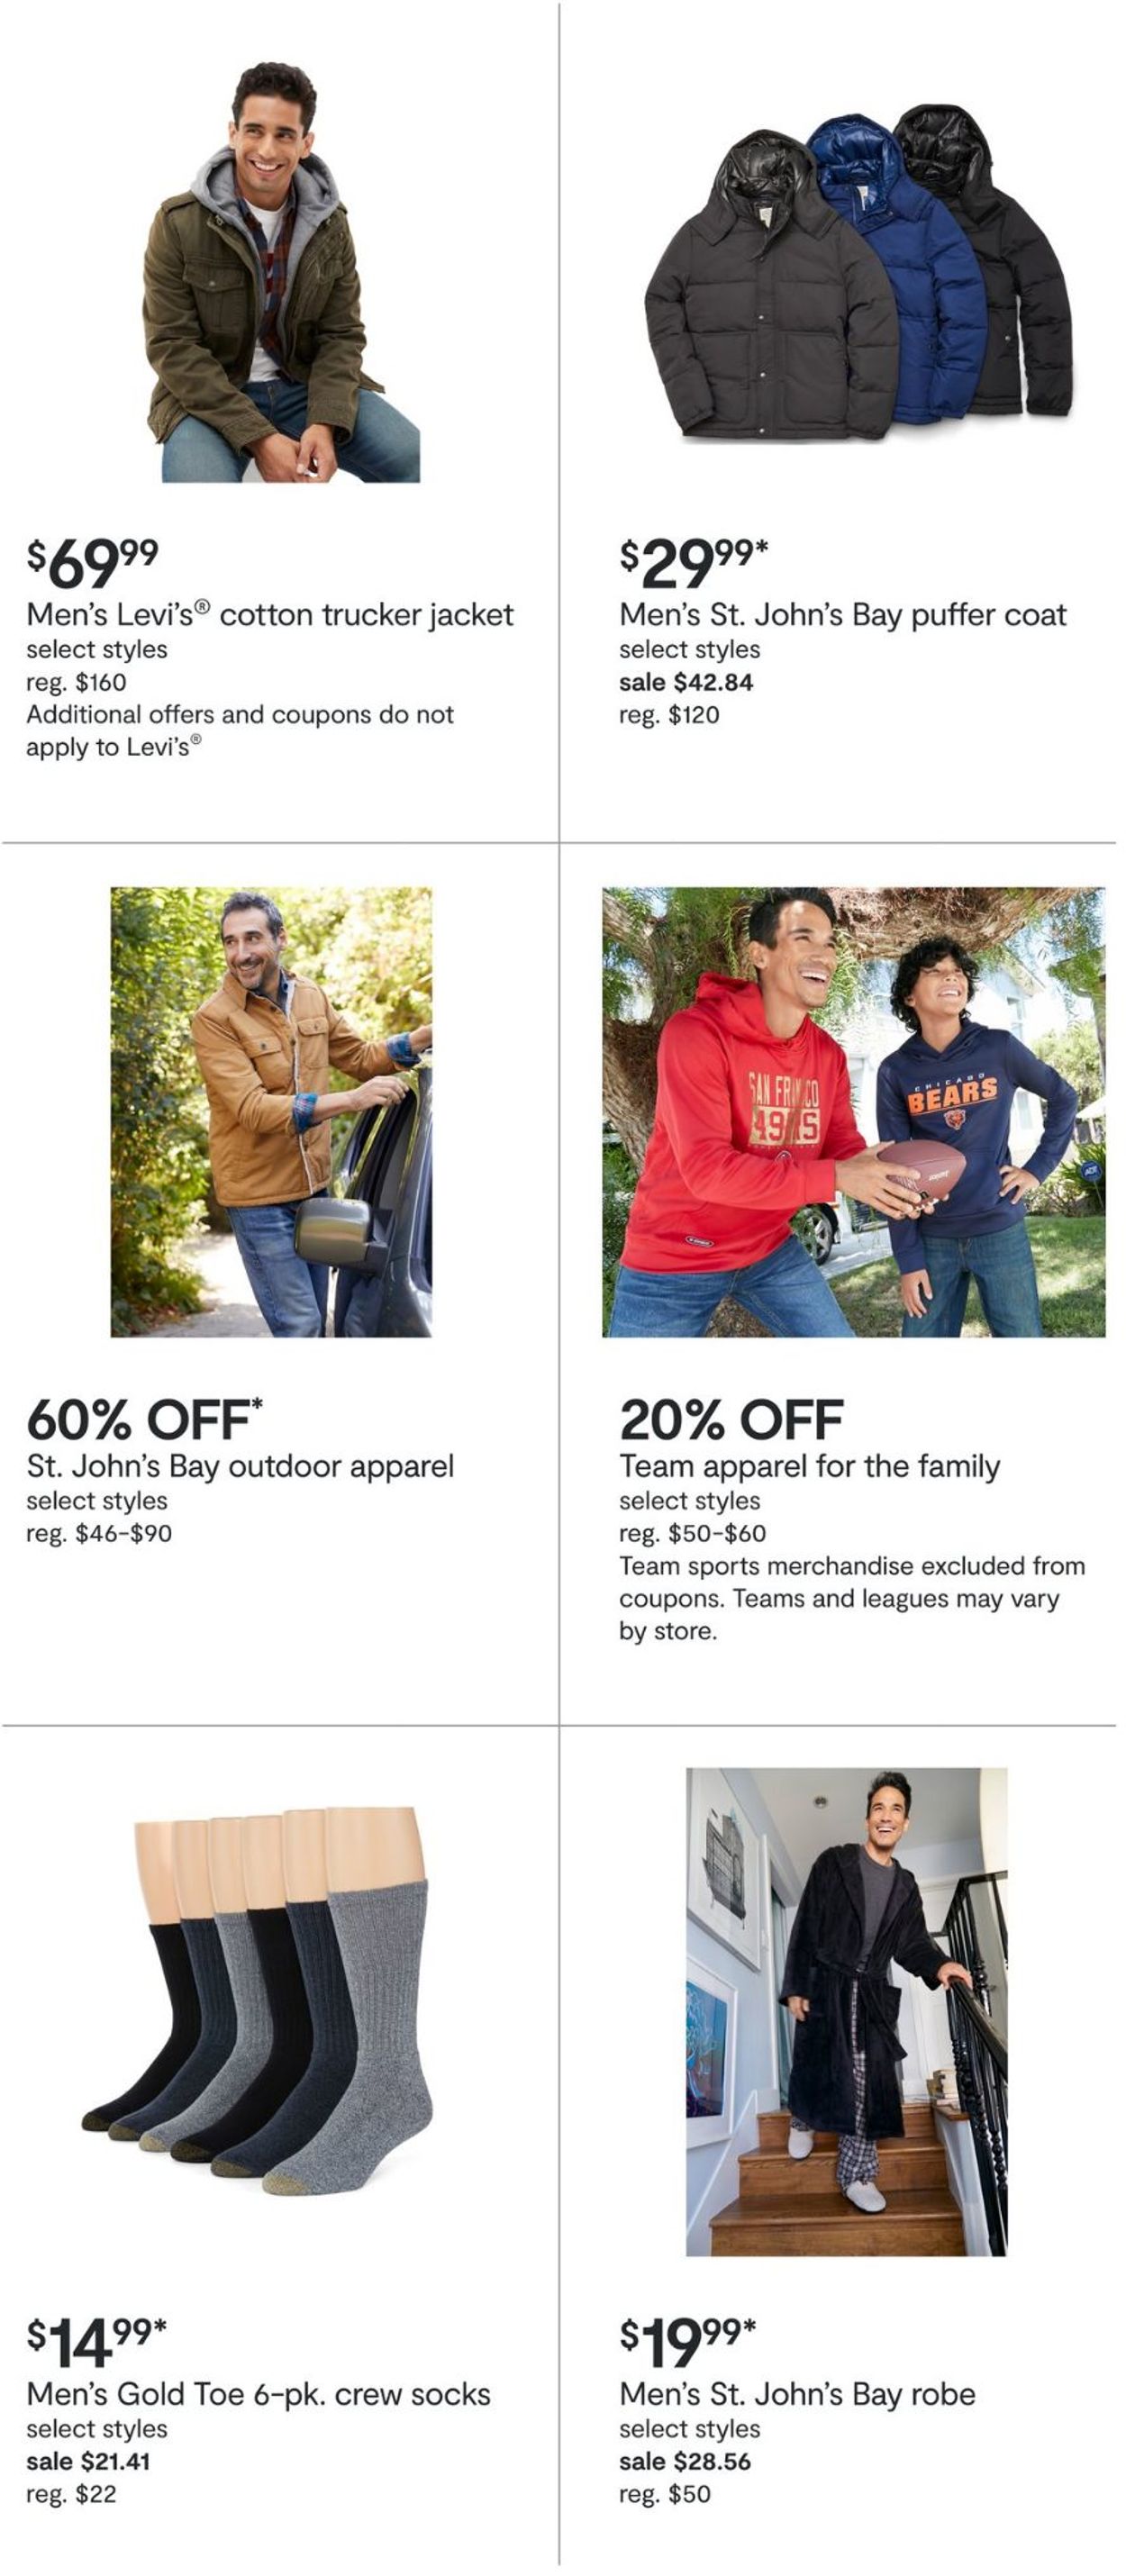 Catalogue JCPenney Black Friday 2020 from 11/13/2020